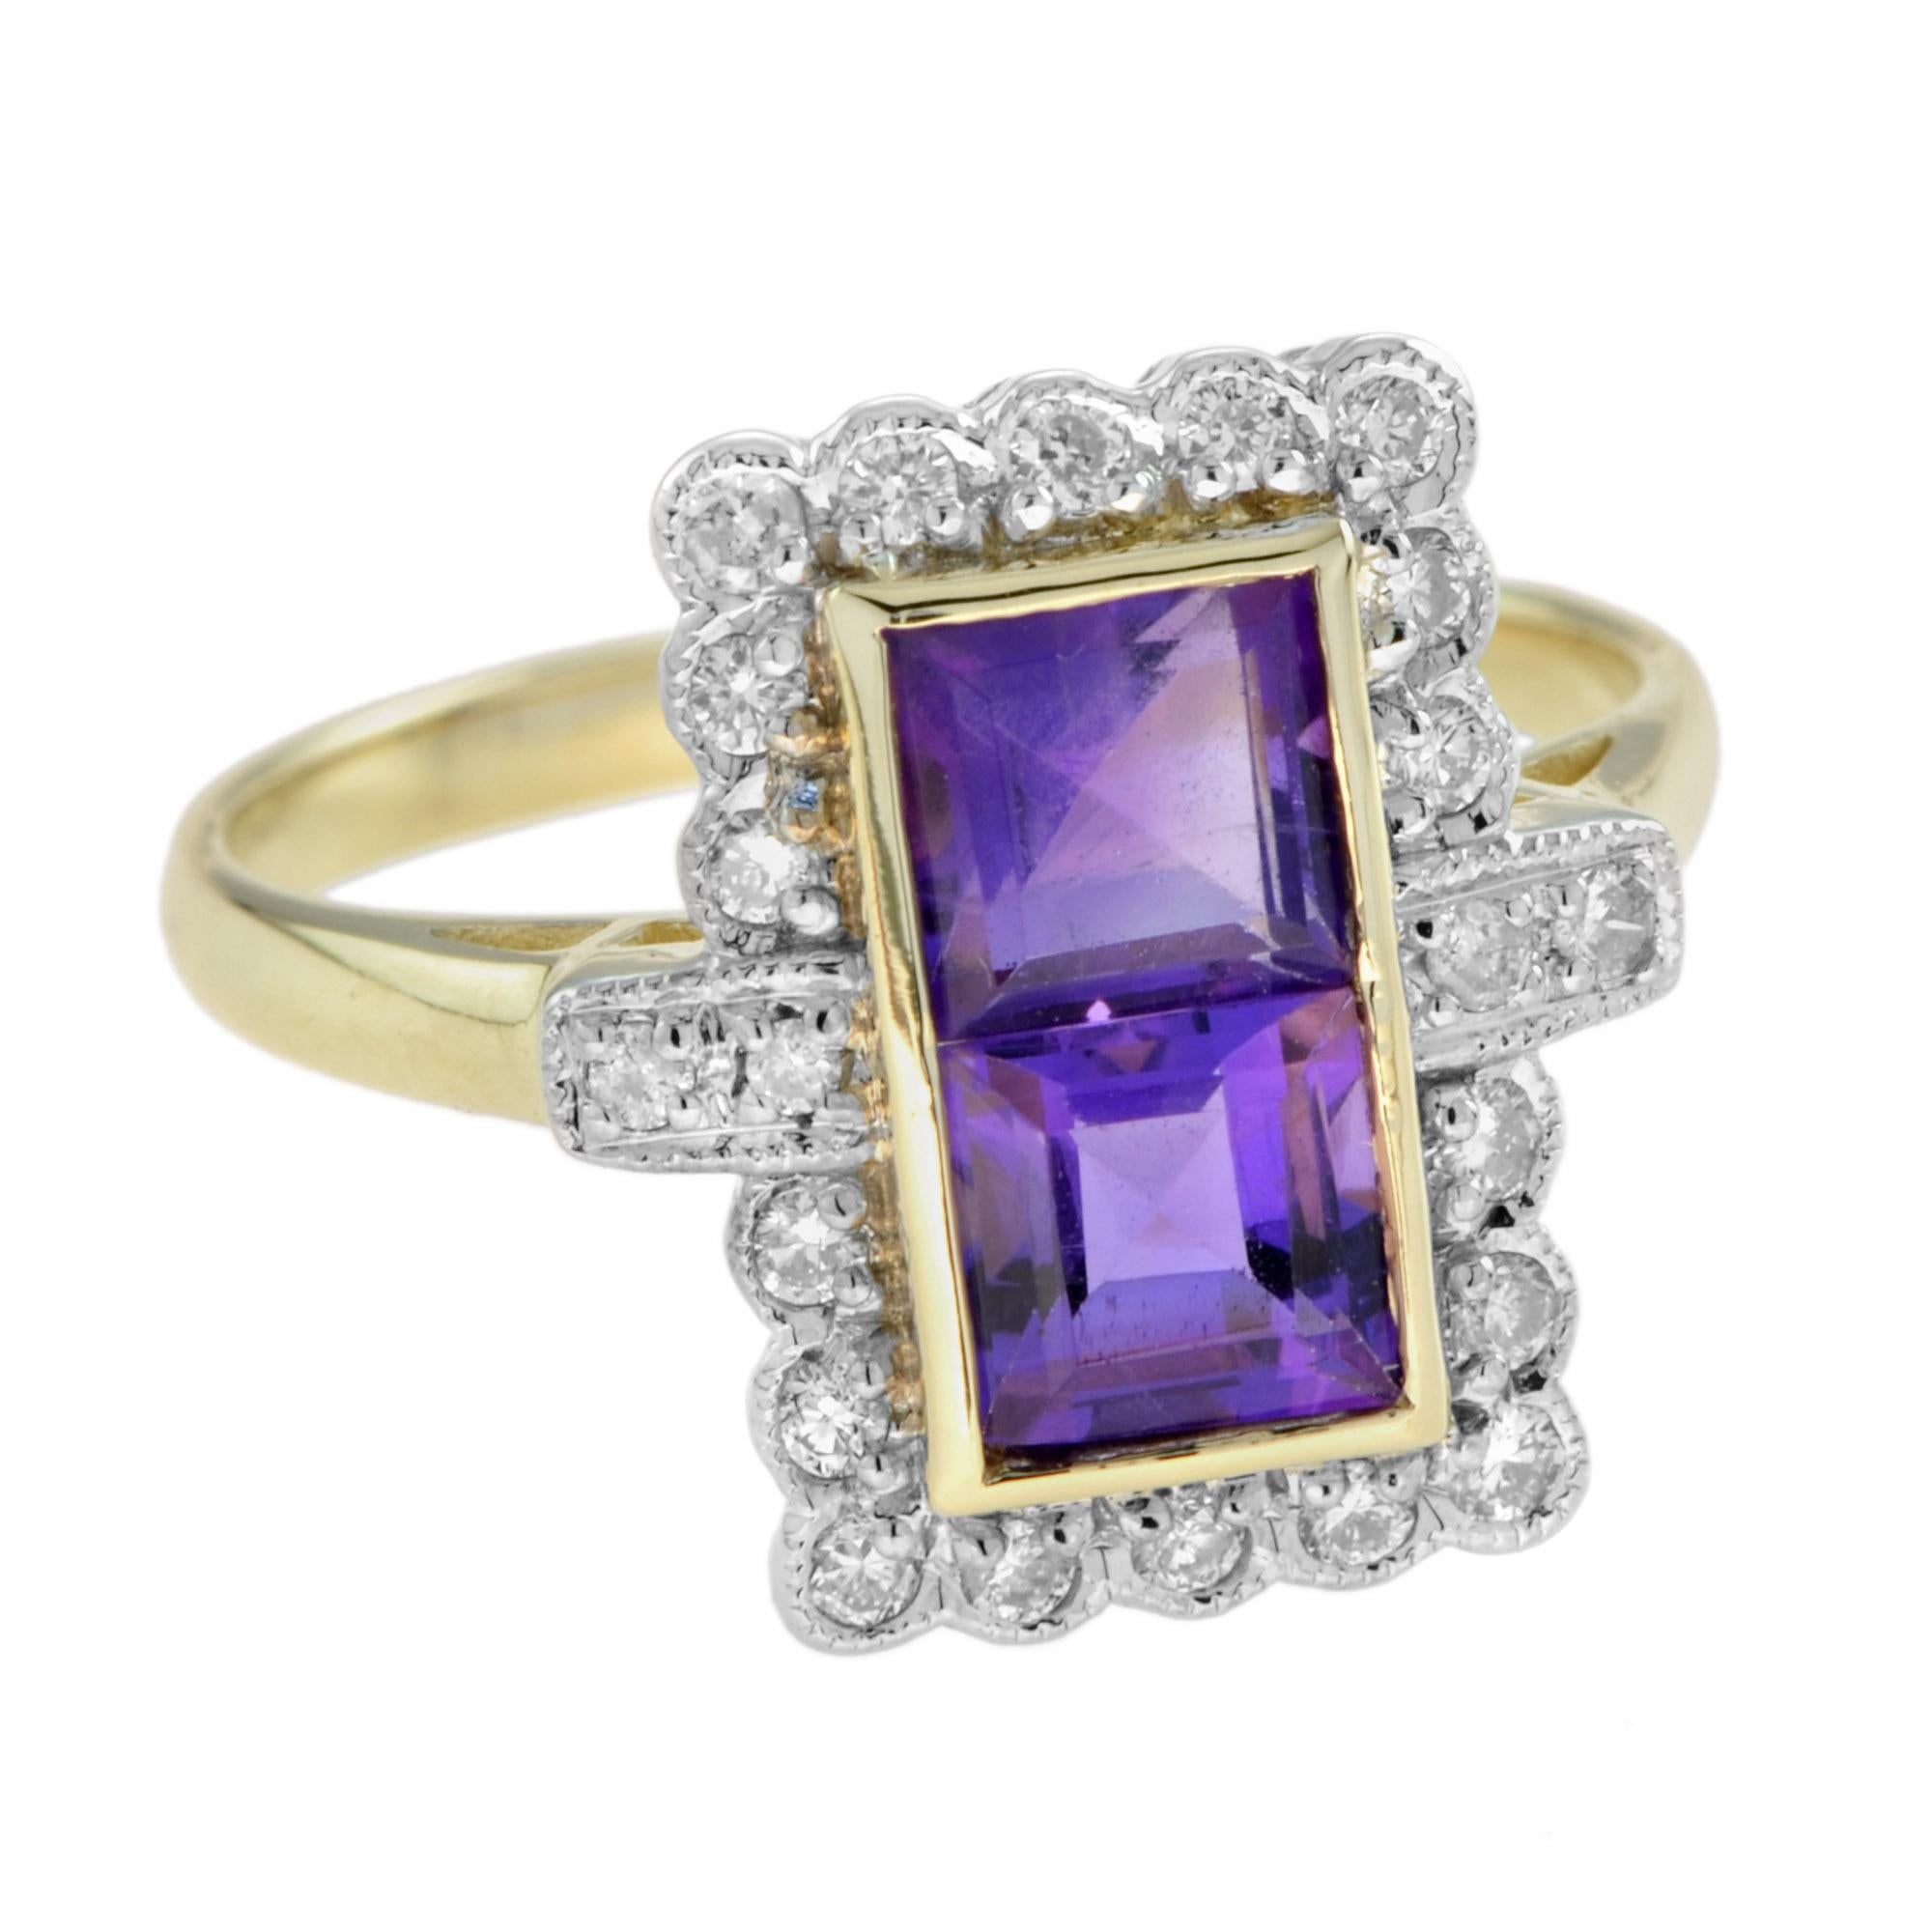 This beautiful Vintage inspired amethyst ring is centered with two square cut amethysts and accented with sparkling diamond halo. The ring is craft of 9k yellow gold with white edge diamond part. Adorn yourself with this February birthstone